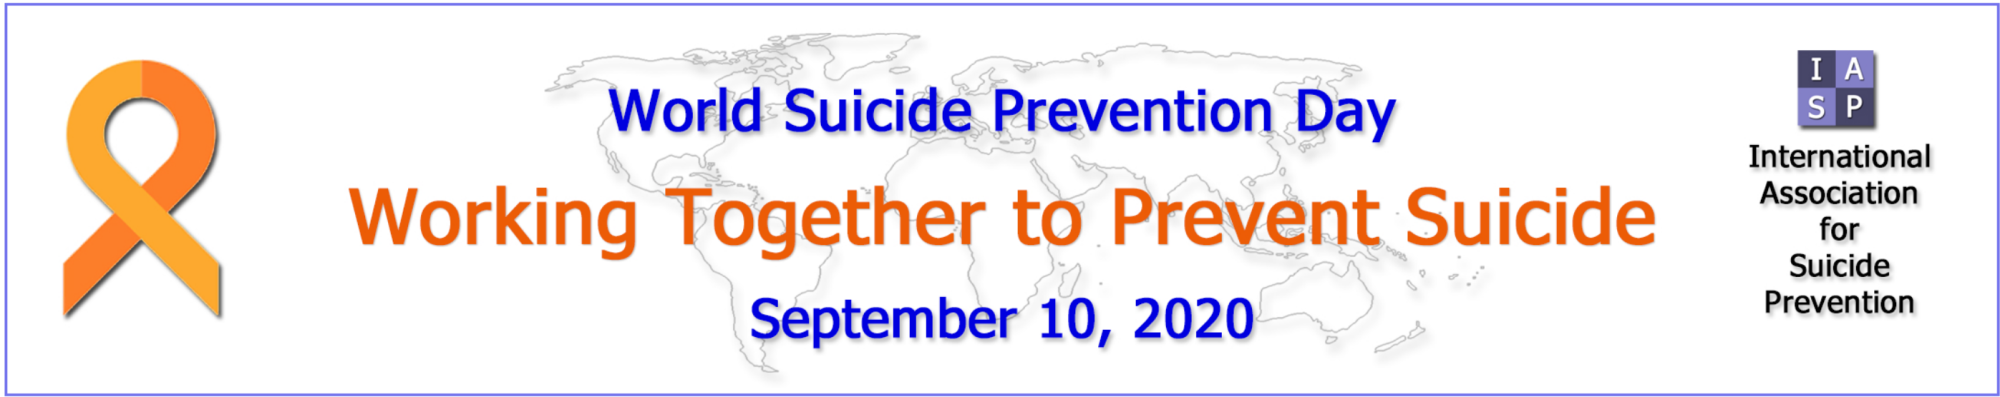 Working together to prevent suicide